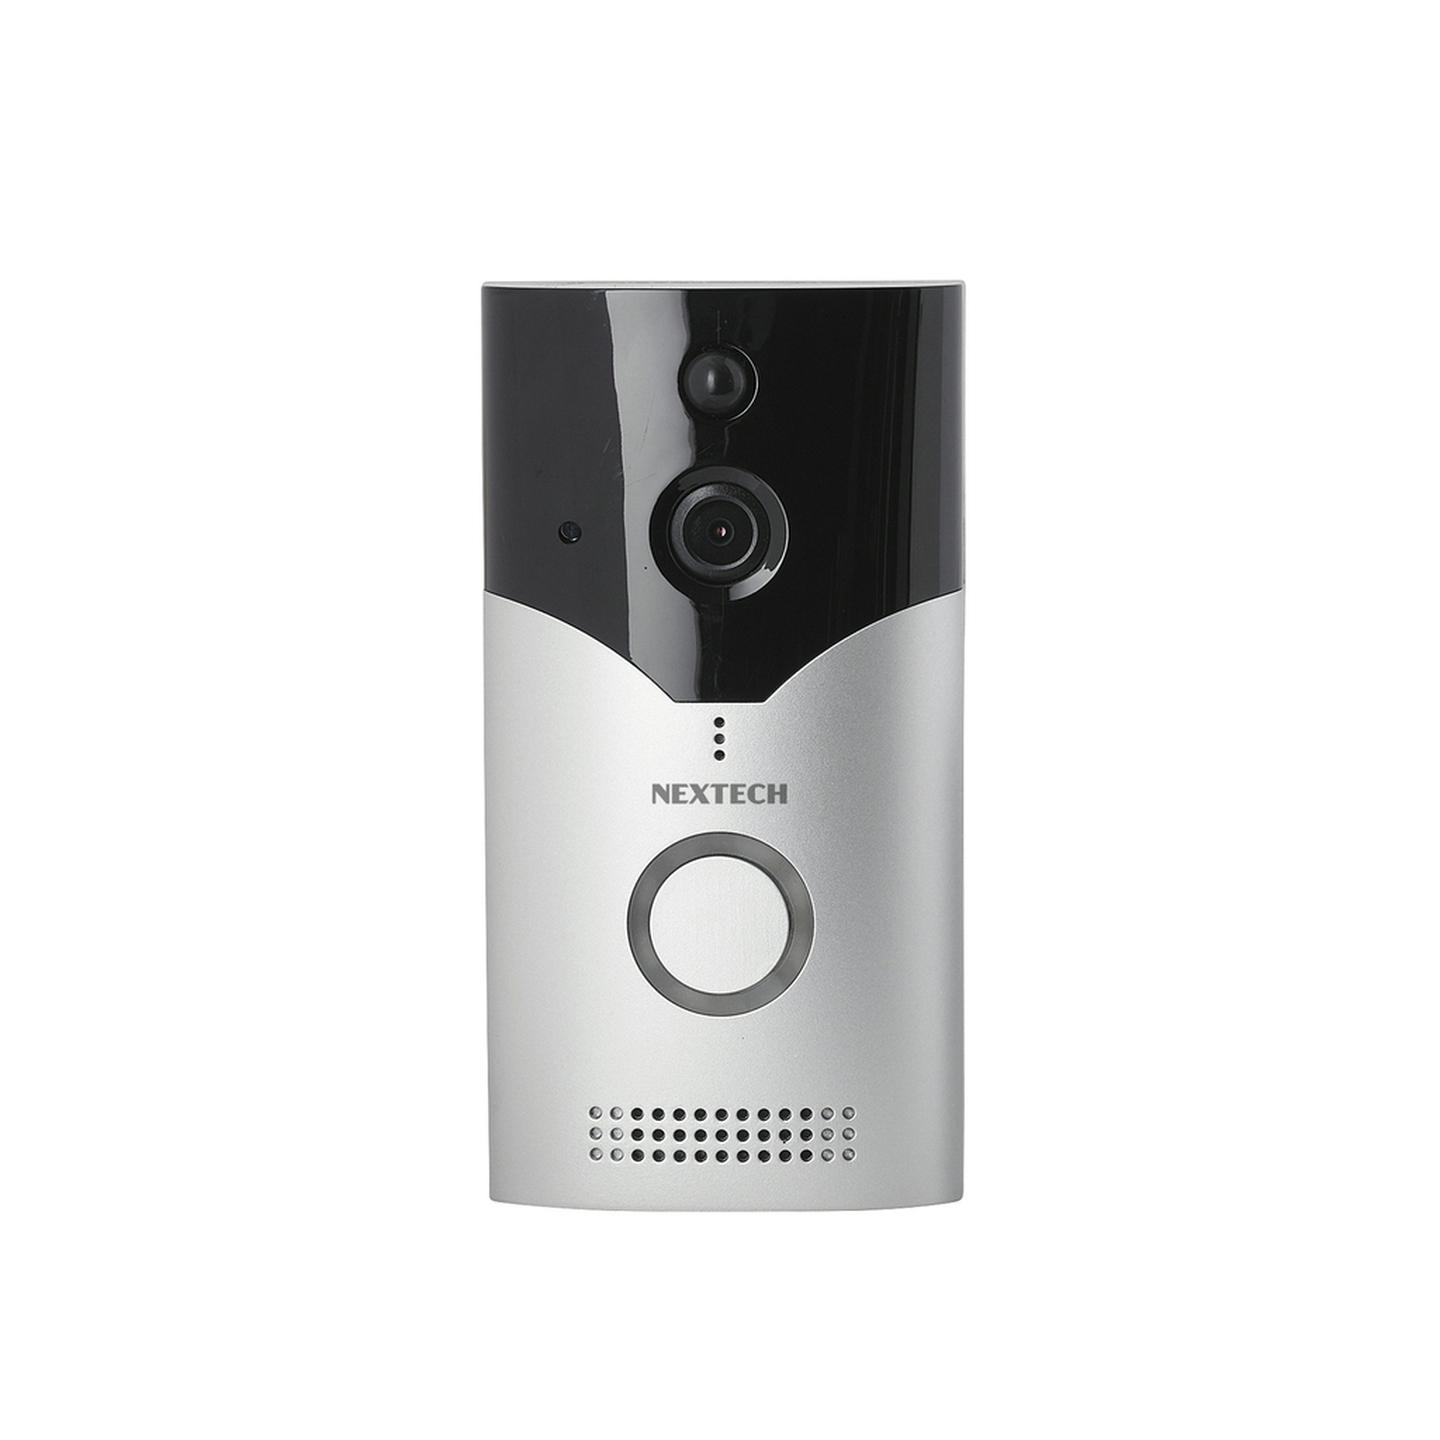 1080p Smart Wireless Video Doorbell and Chime